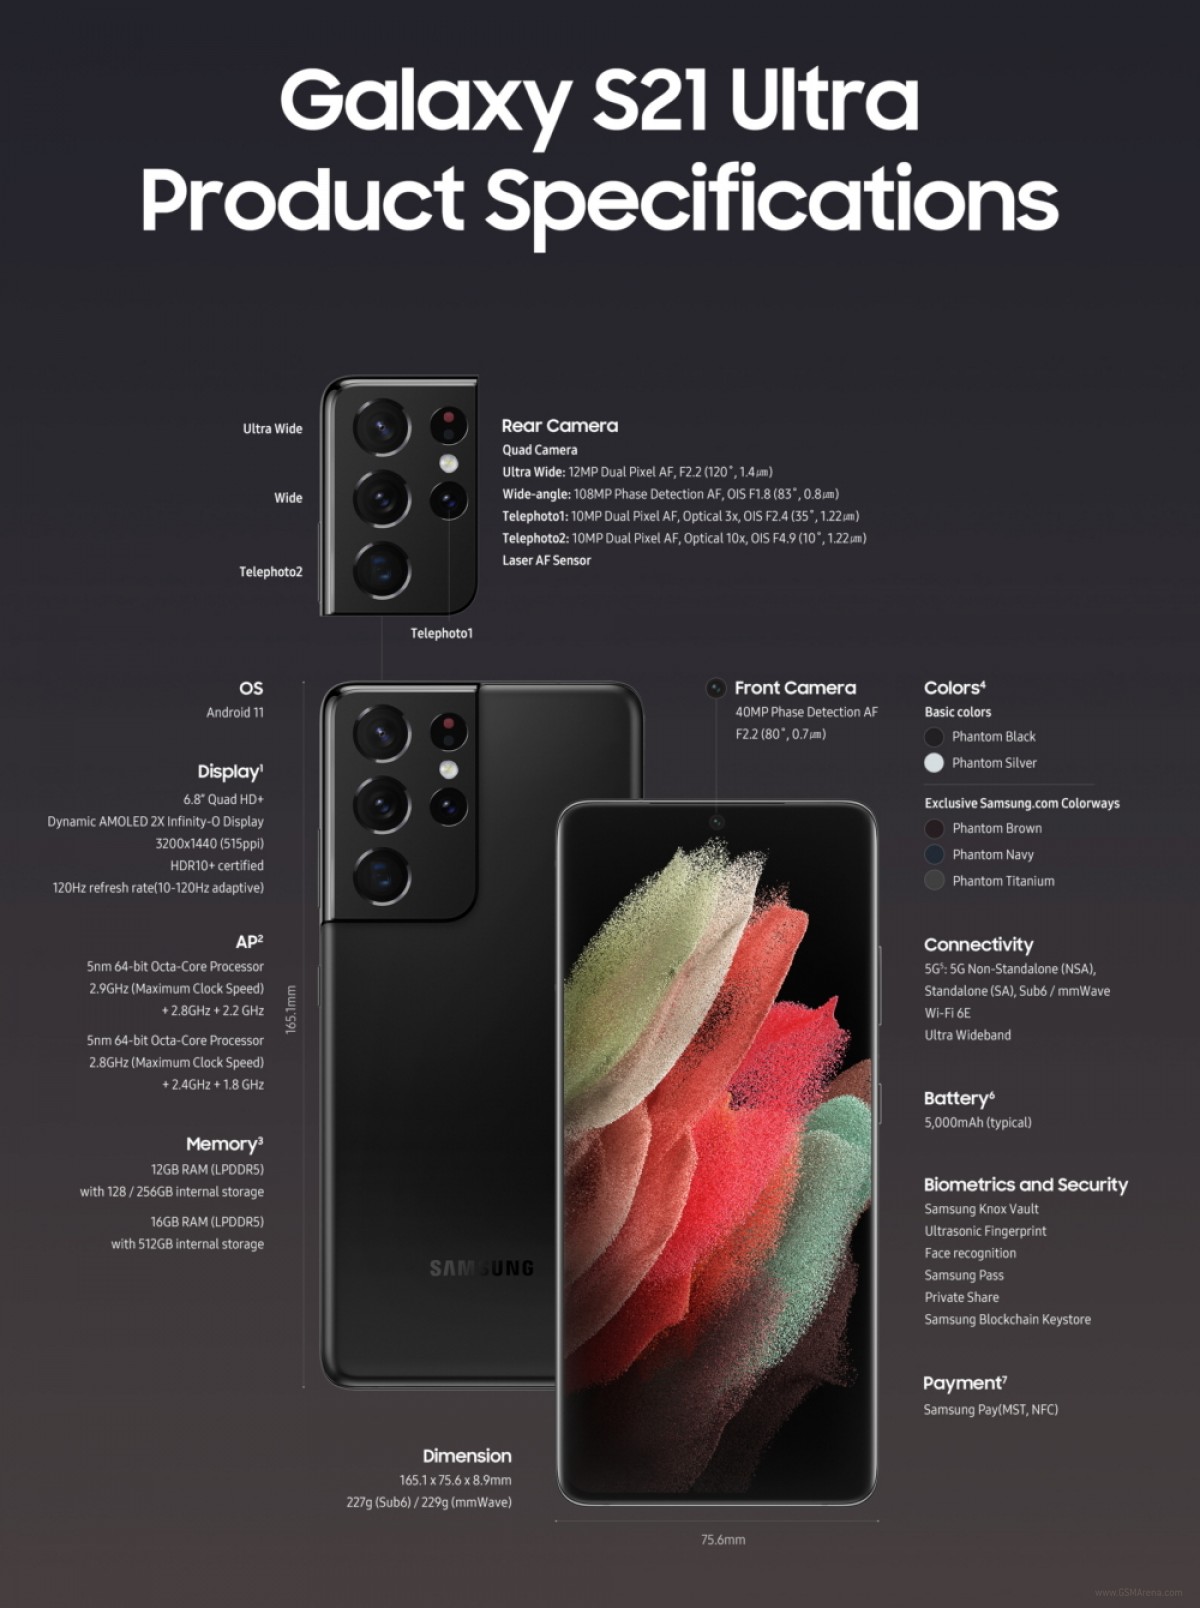 Here are Samsung's Galaxy S21 infographics